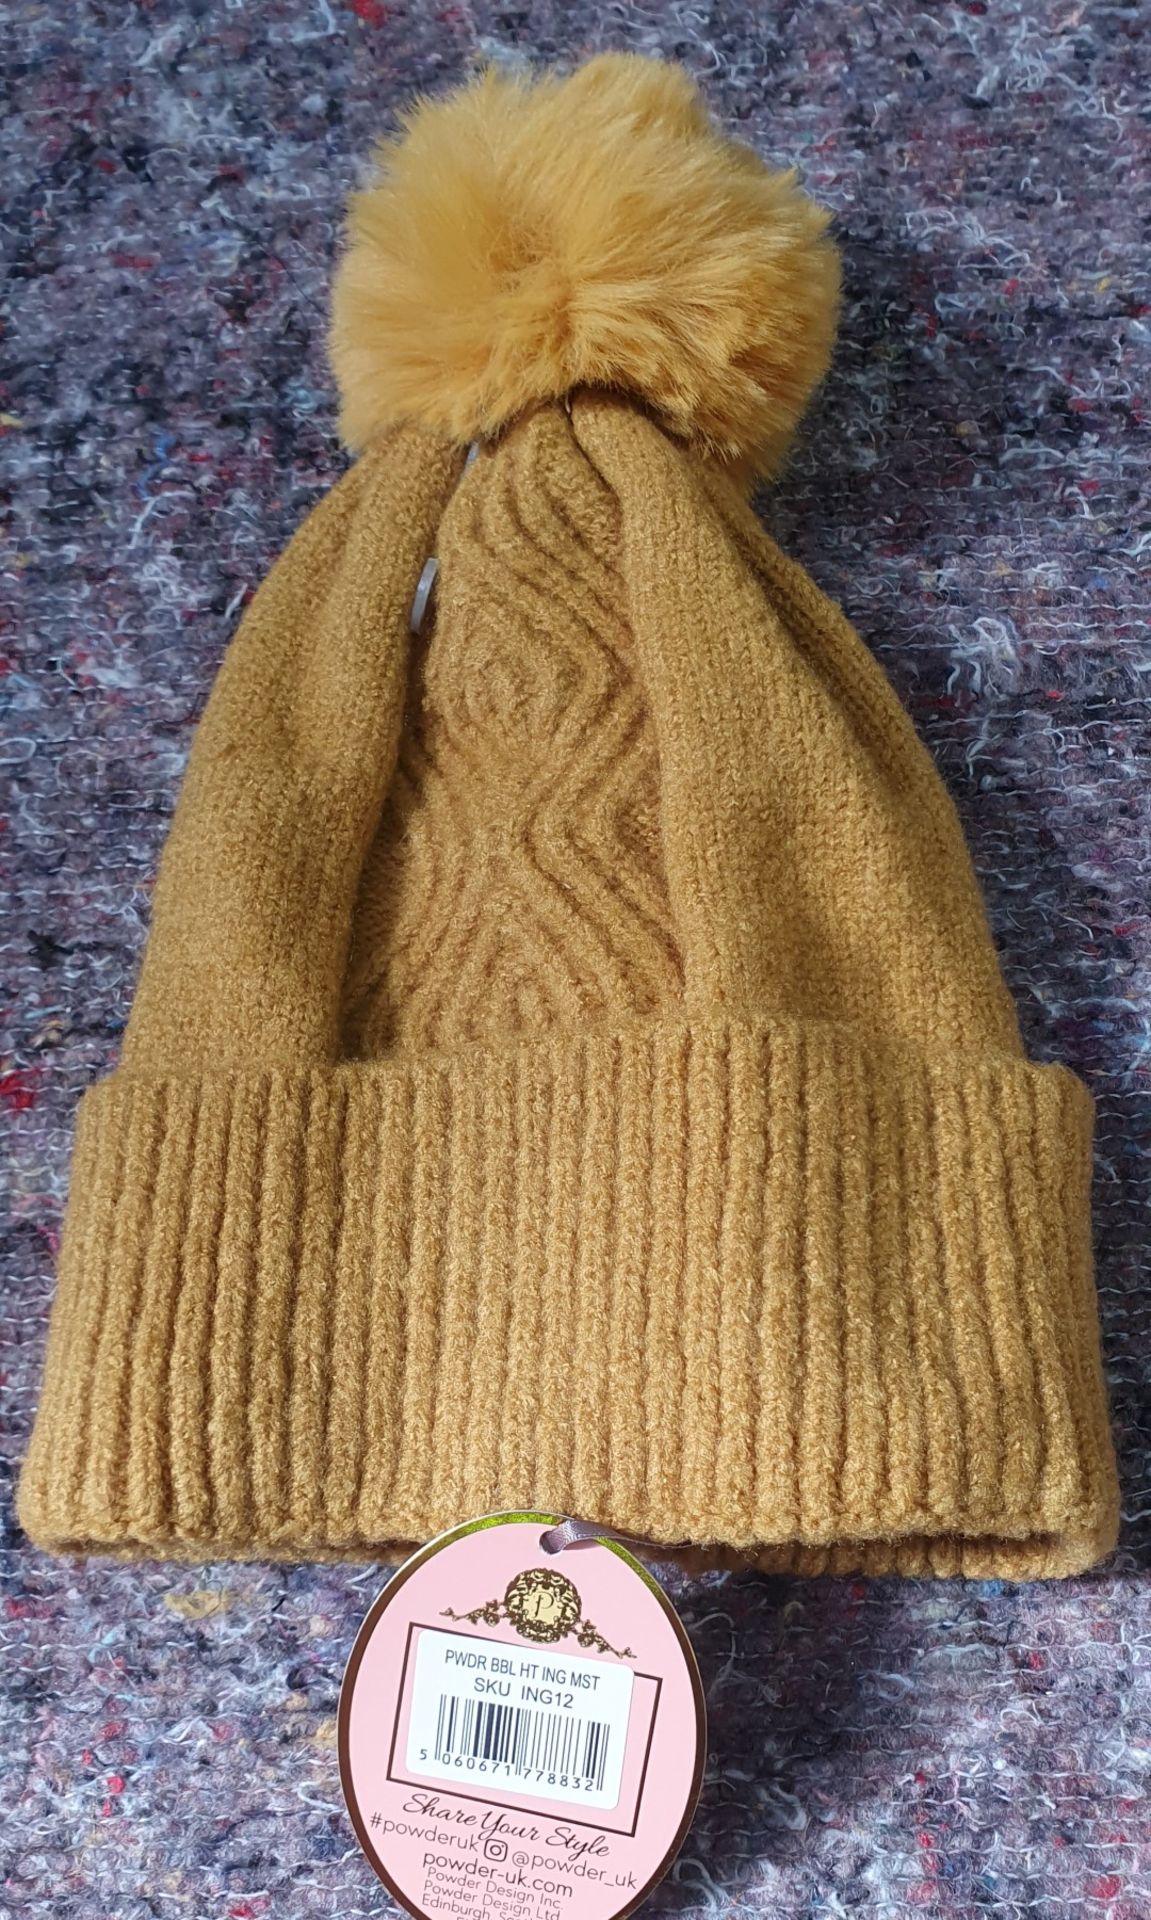 10 x Powder Woolly Bobble Hats and Velvet Gloves With Woolly Cuffs - New Stock - Ref: TCH242 - CL840 - Image 15 of 17